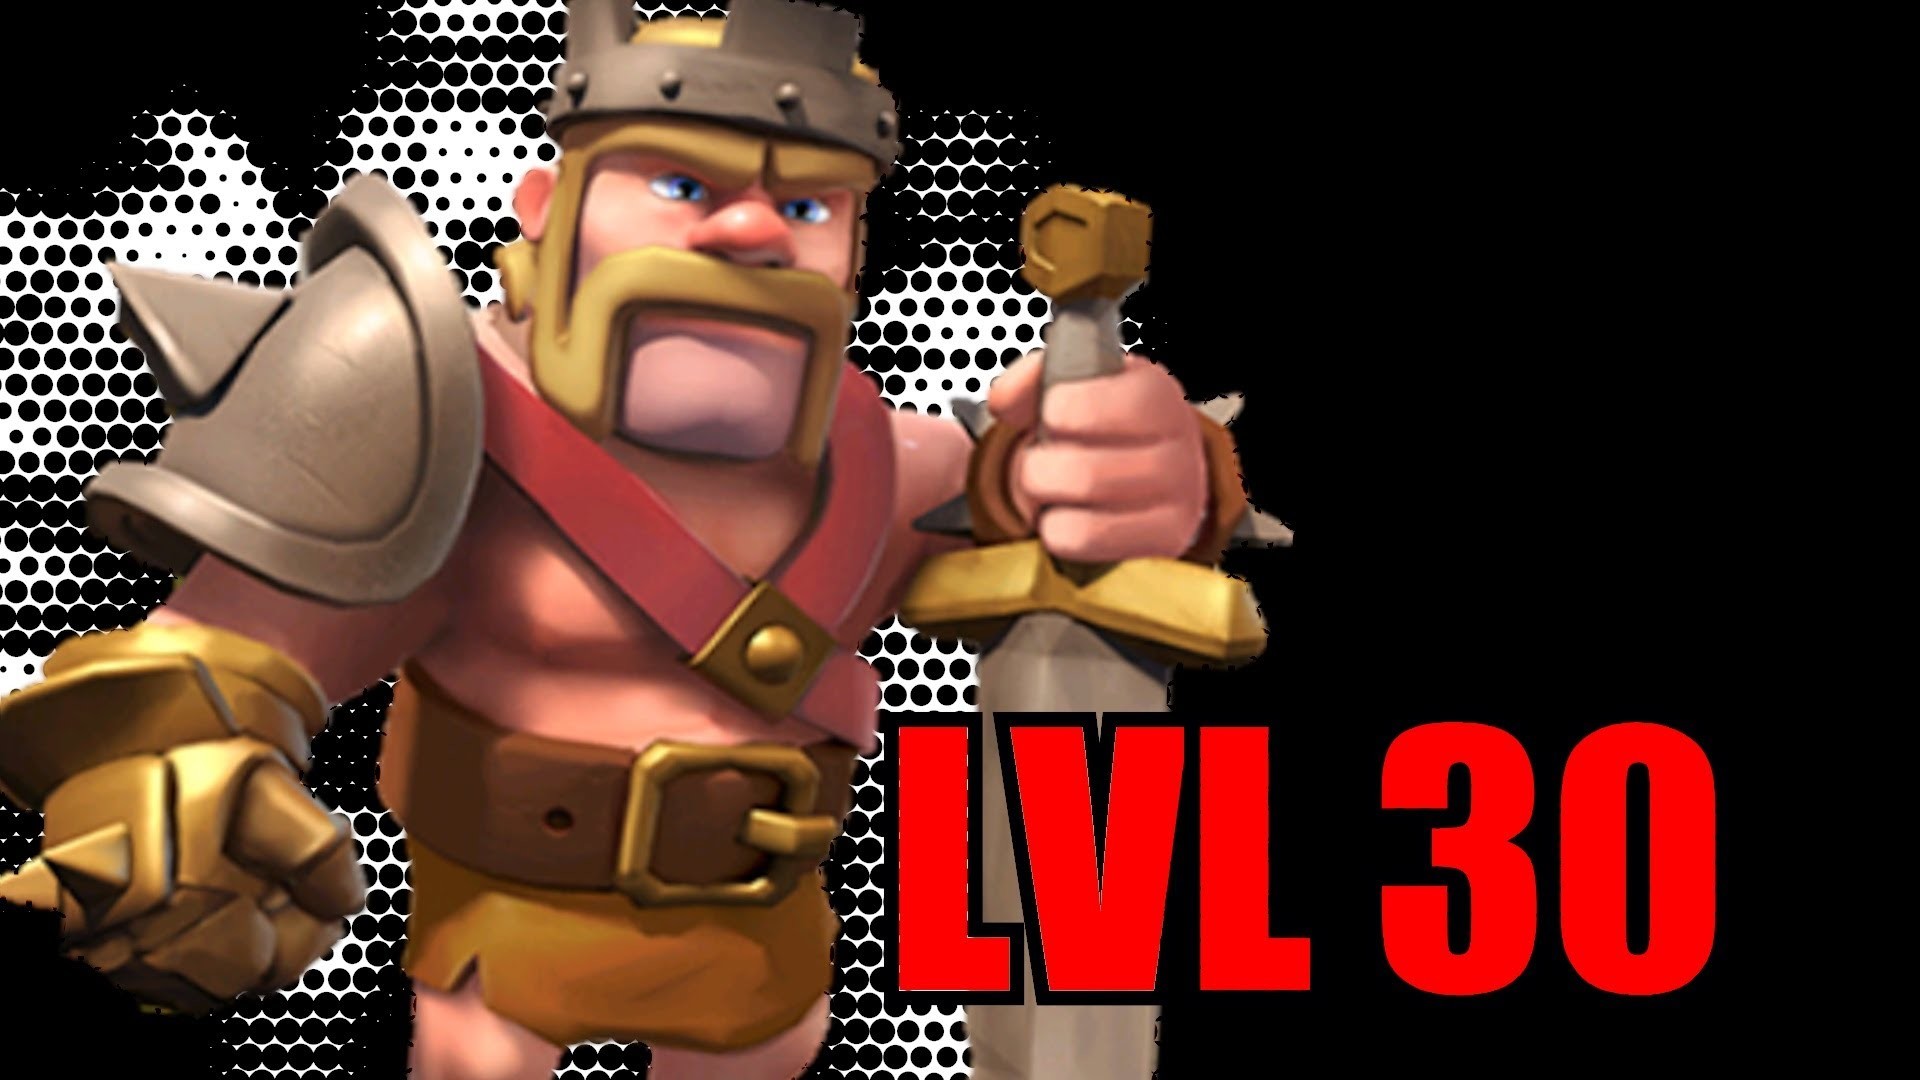 Clash of Clans Barbarian Wallpaper.